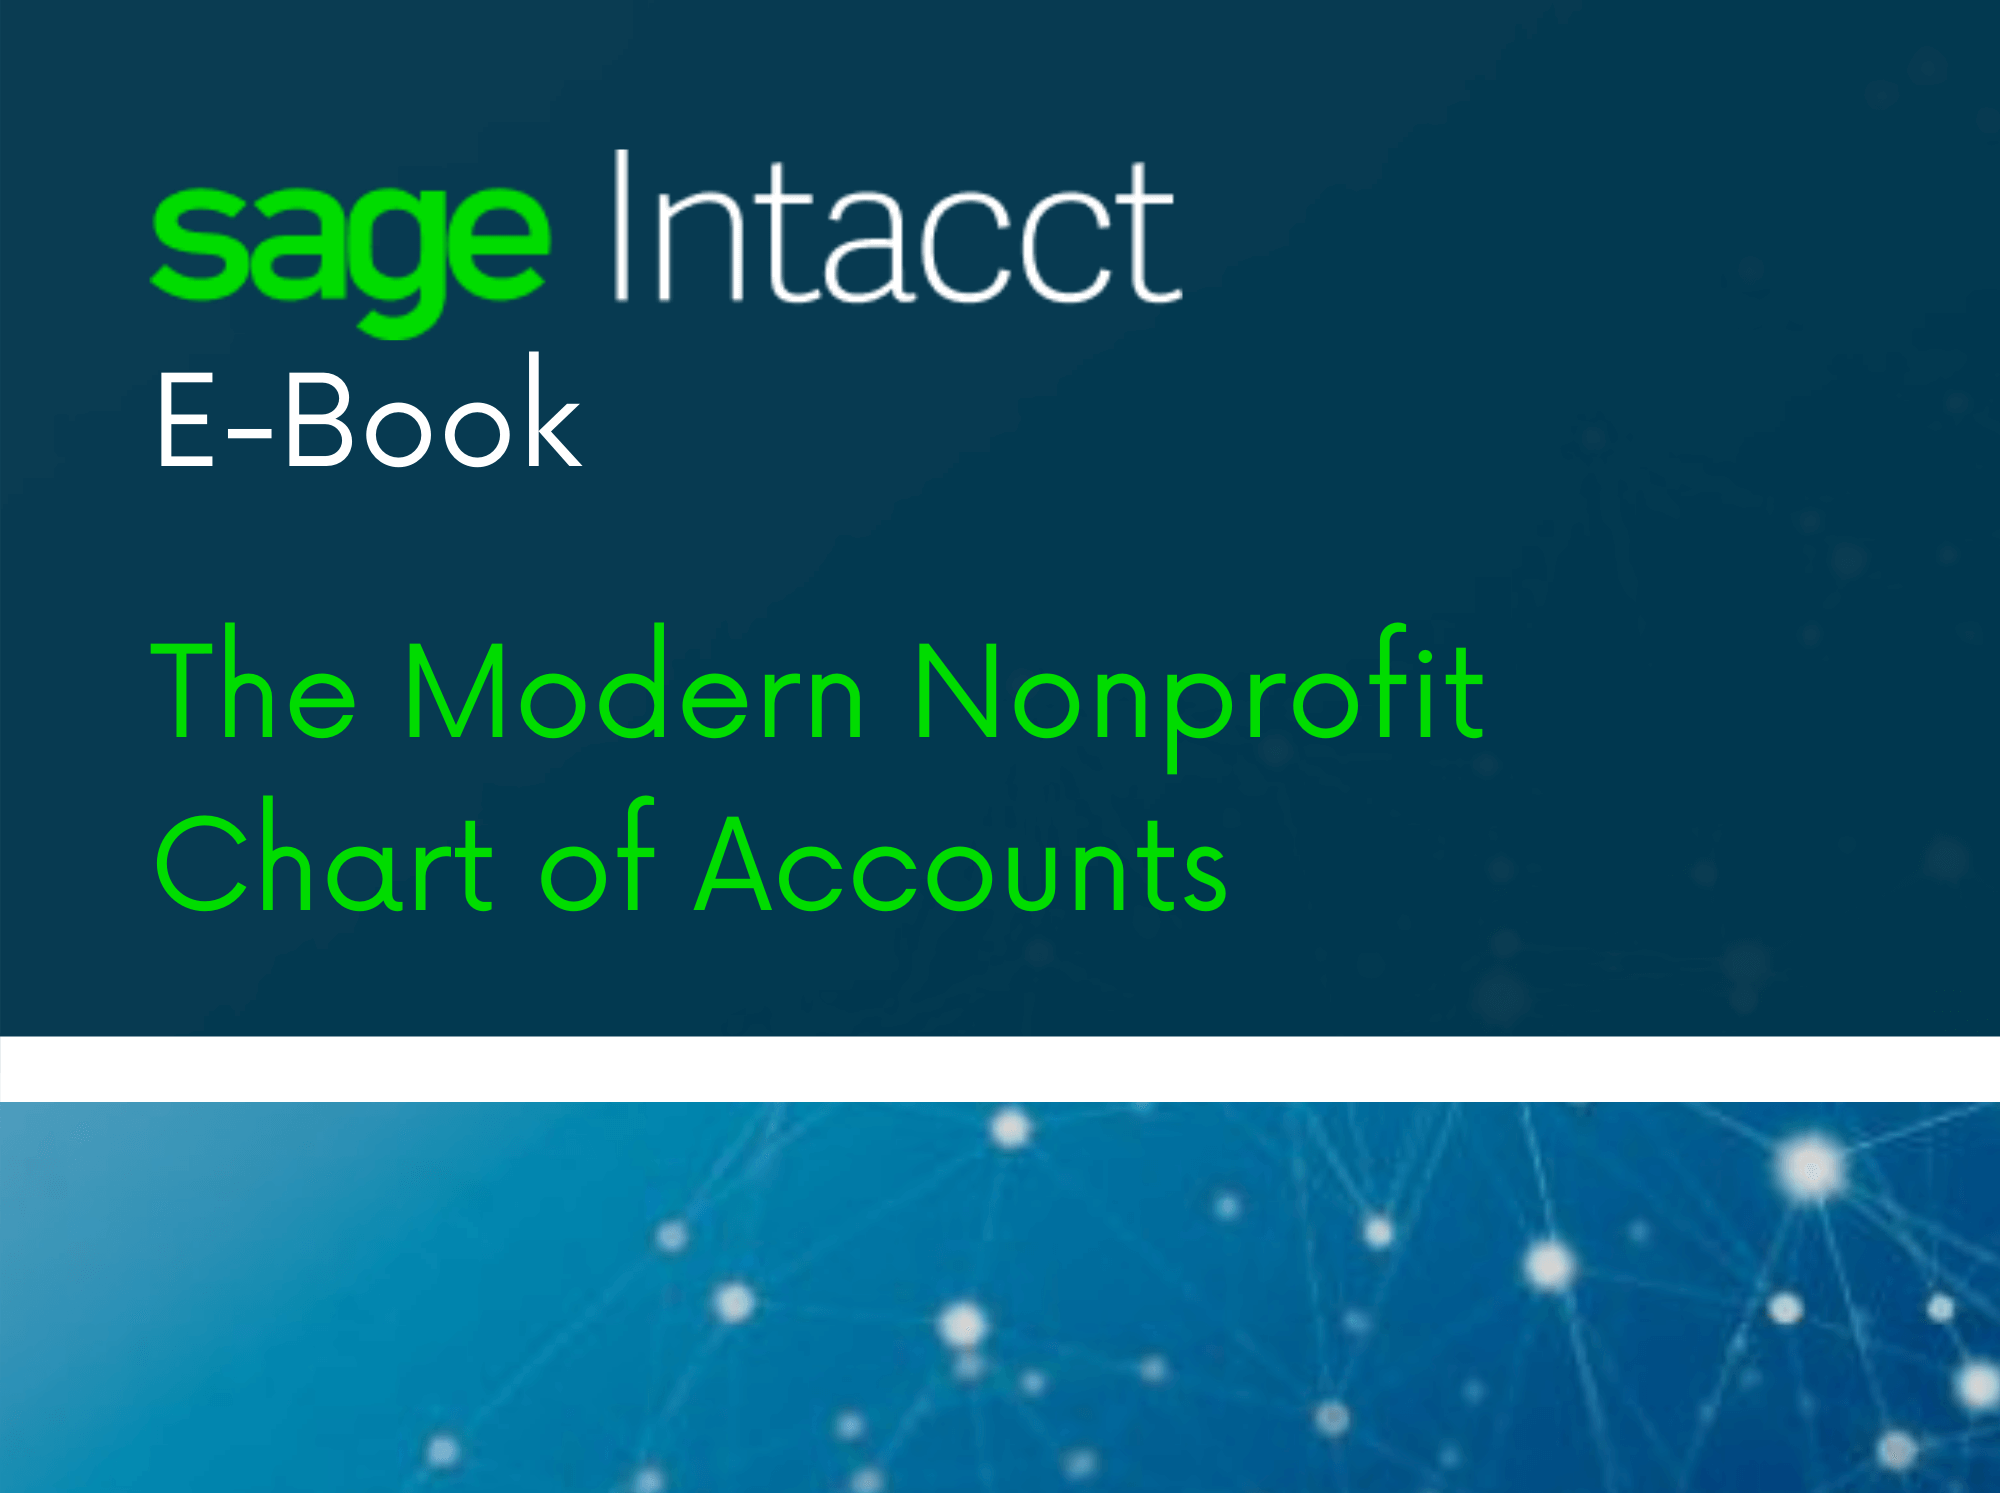 The Modern Nonprofit Chart of Accounts